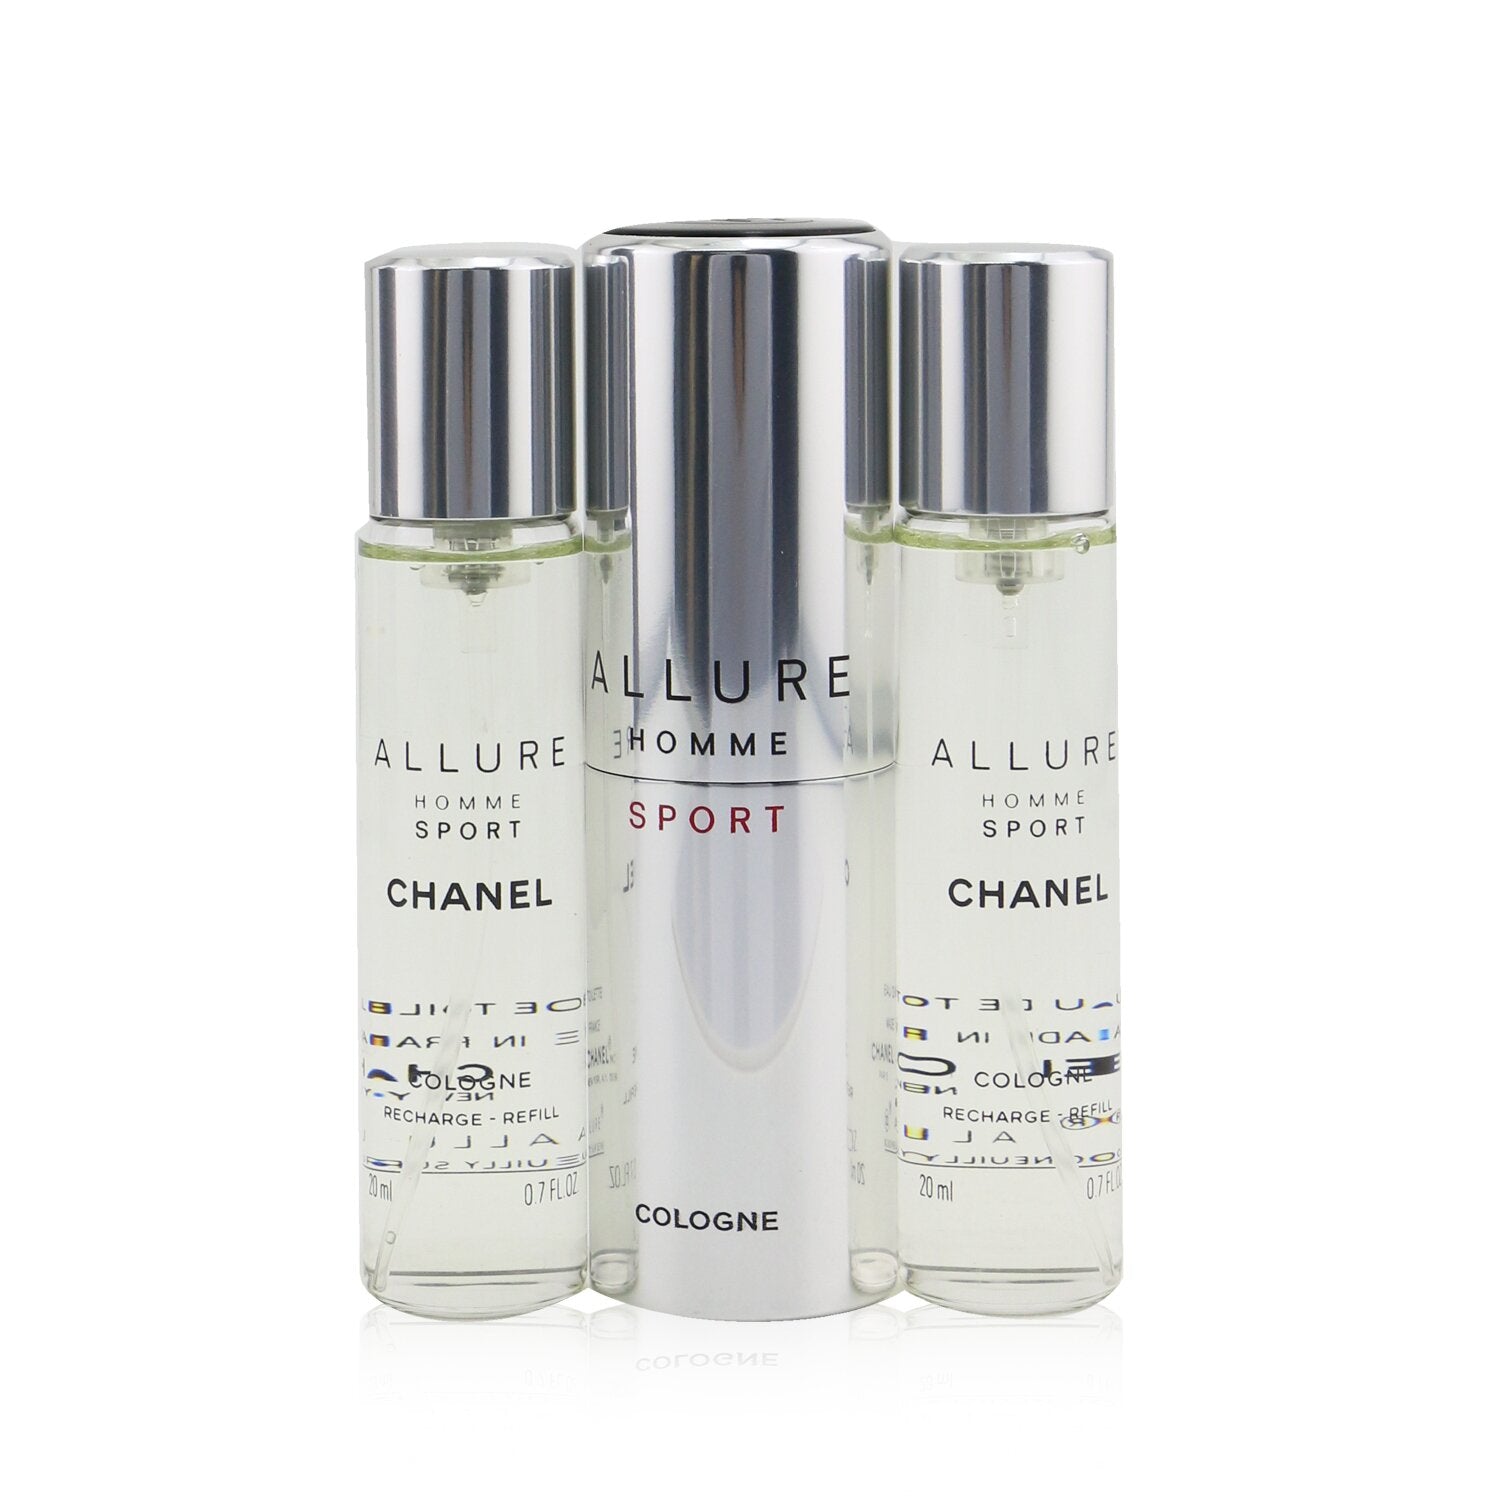 Chanel Allure Homme Sport Cologne Travel Spray & Two Refills